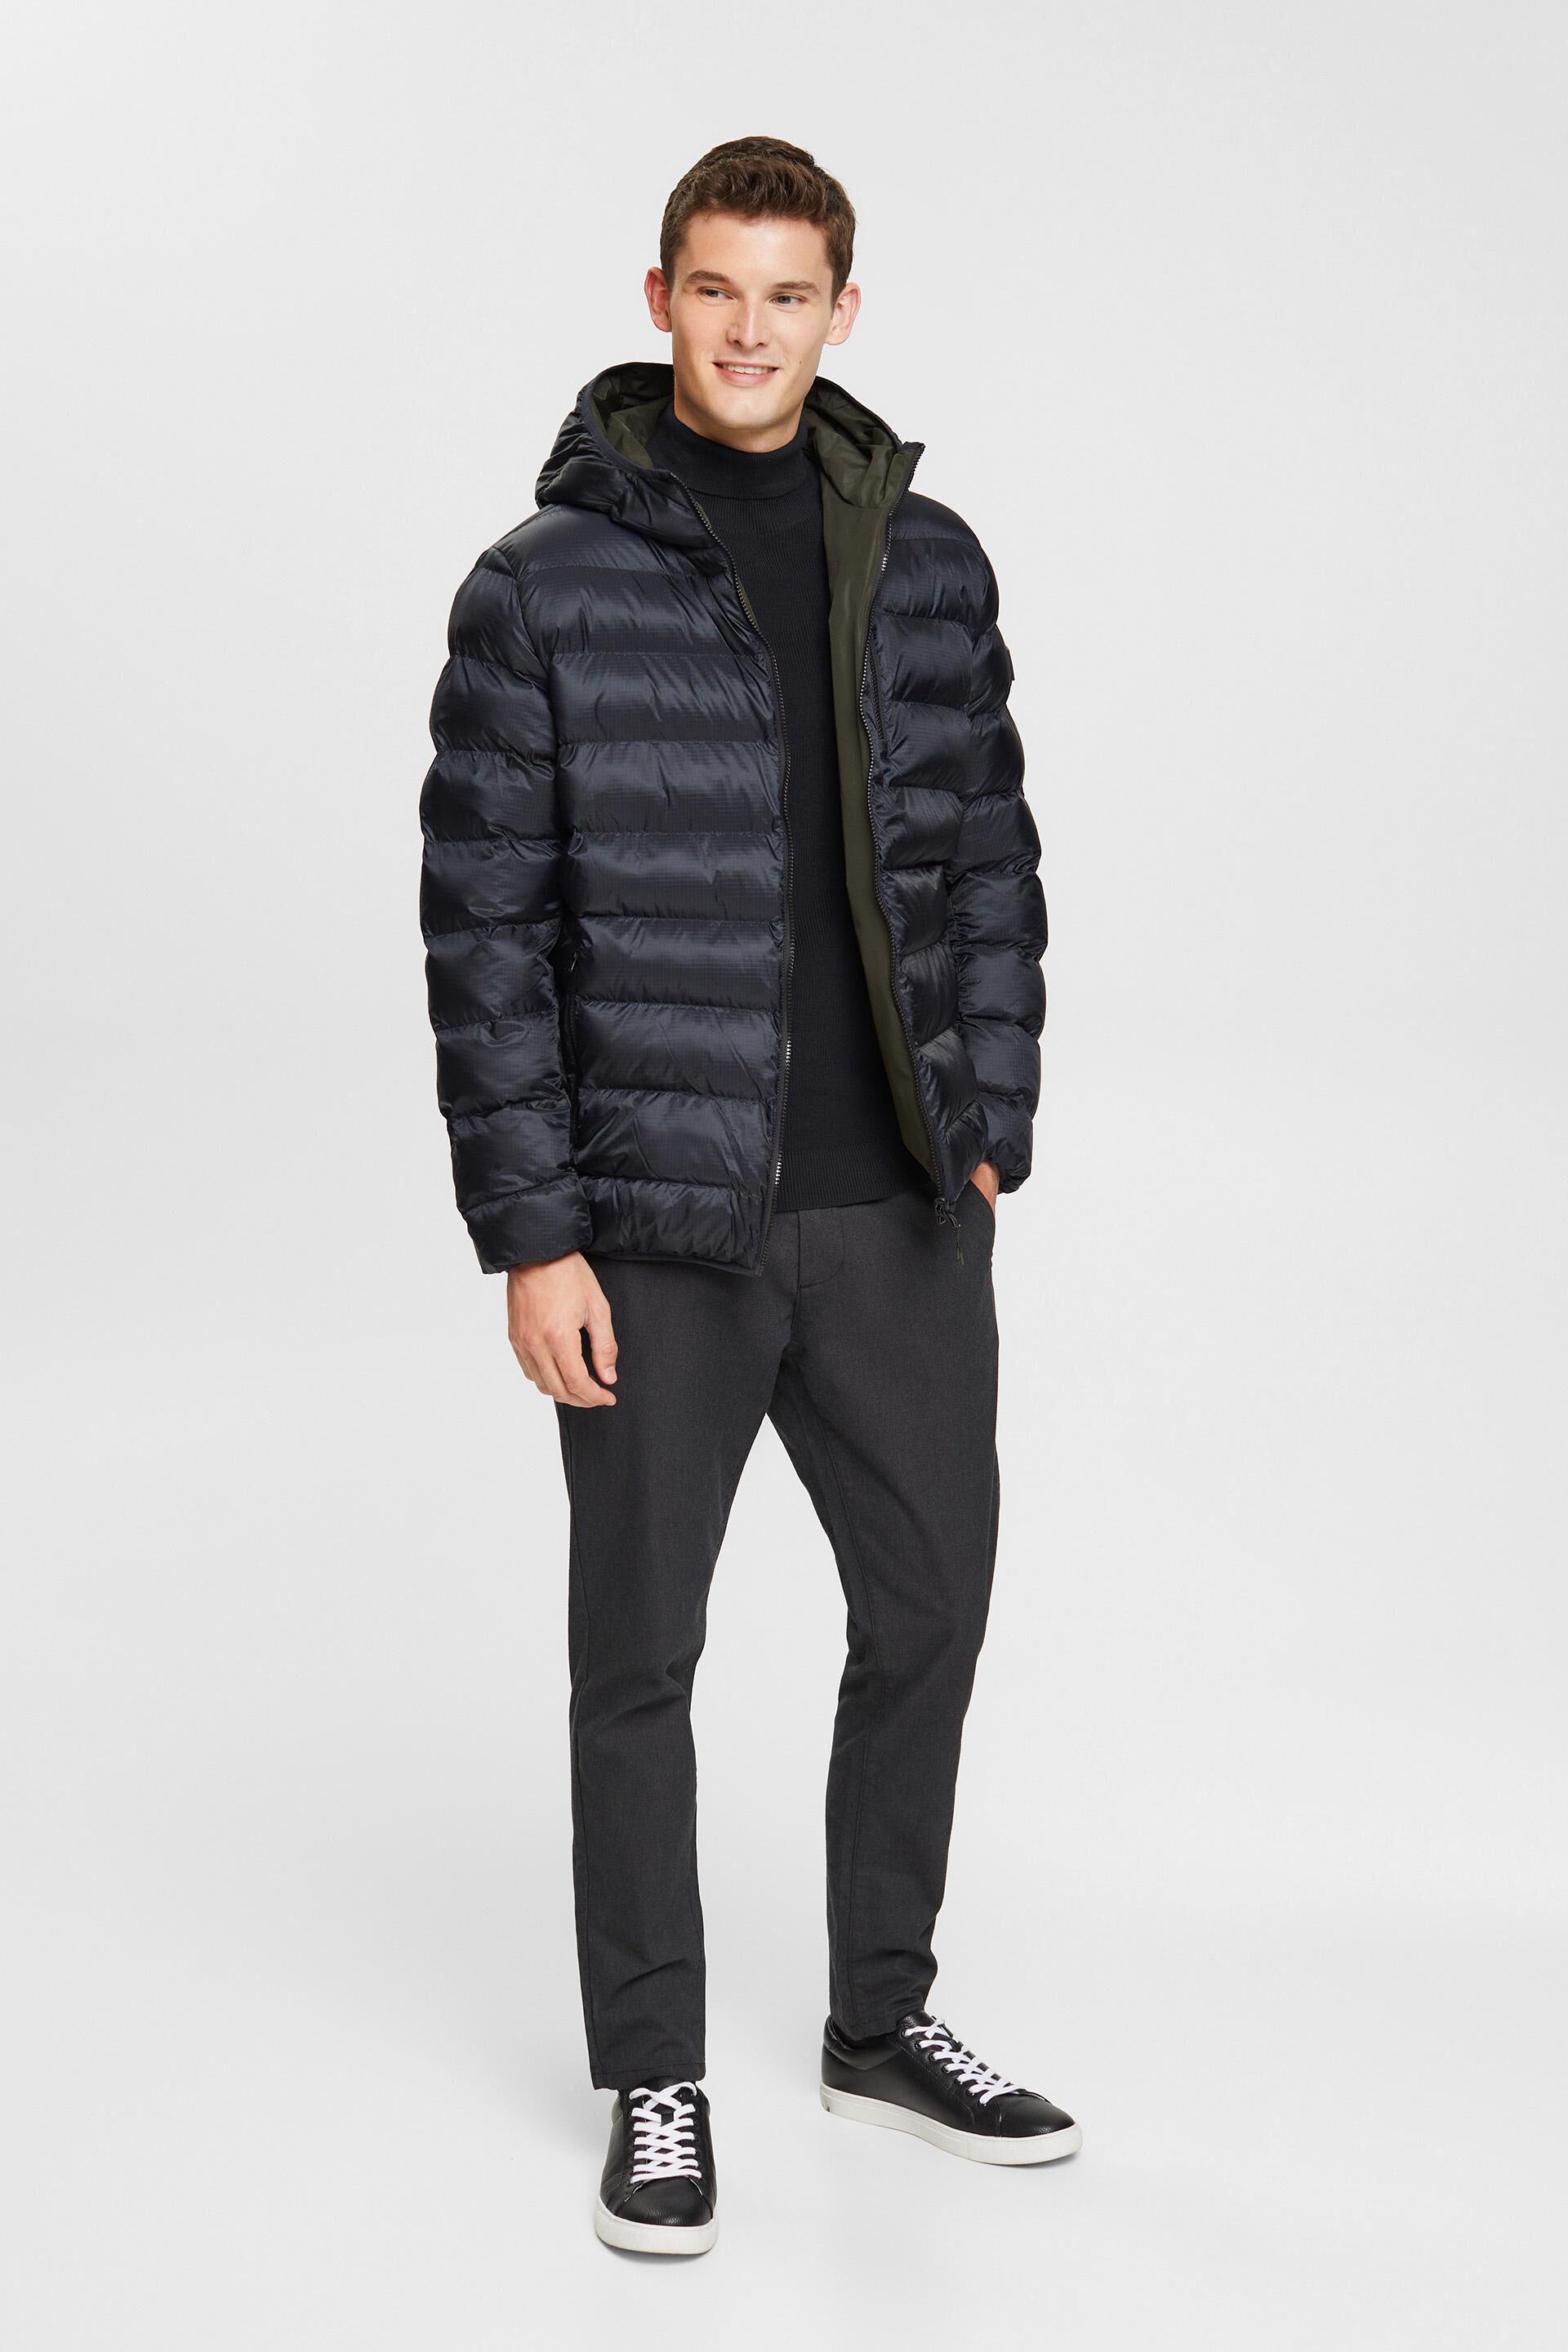 Esprit hood jacket with Quilted